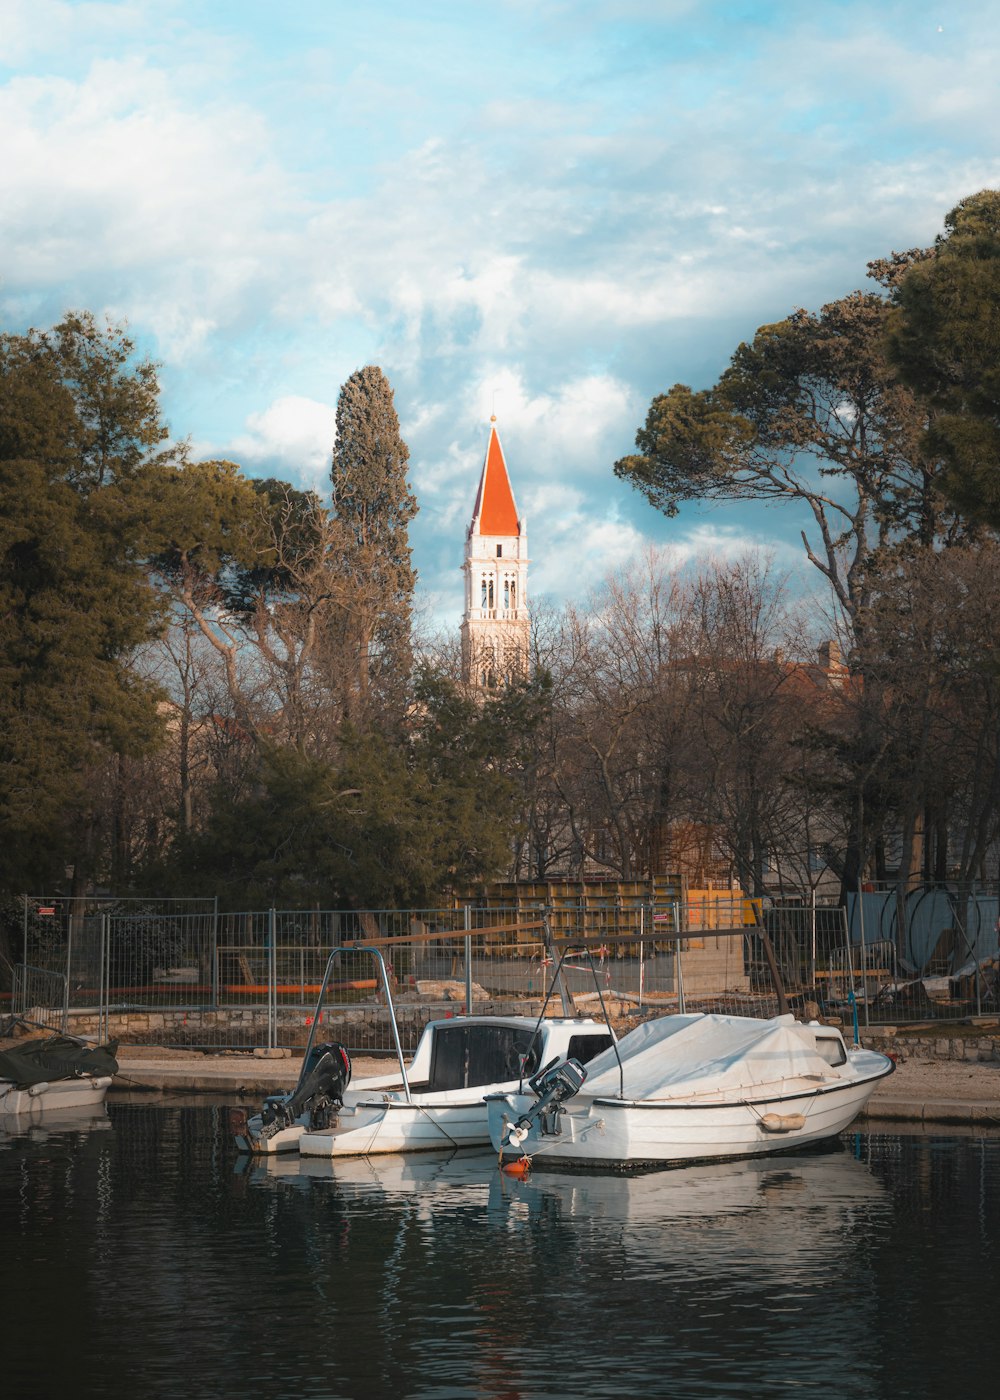 a white boat in the water with a church steeple in the background